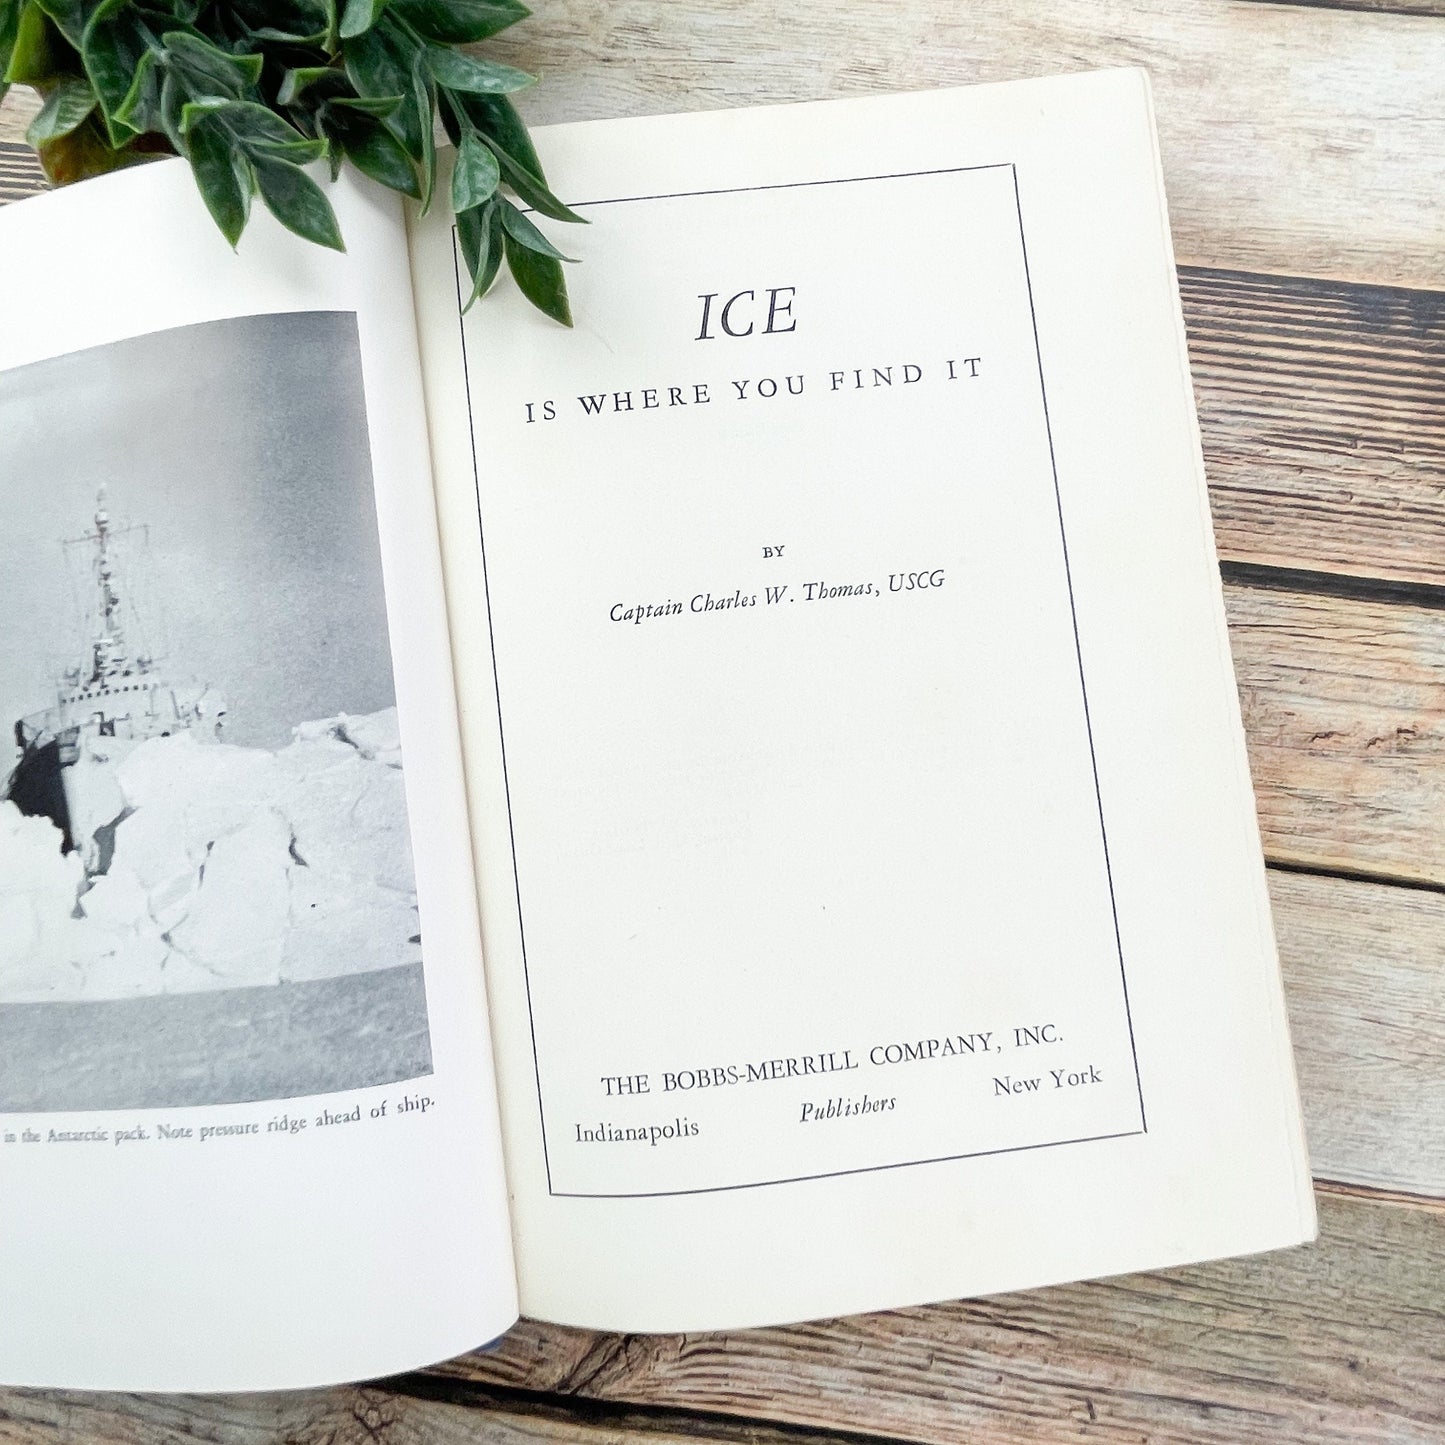 Rare Books, Vintage Book, Ice is Where You Find It by Charles W. Thomas